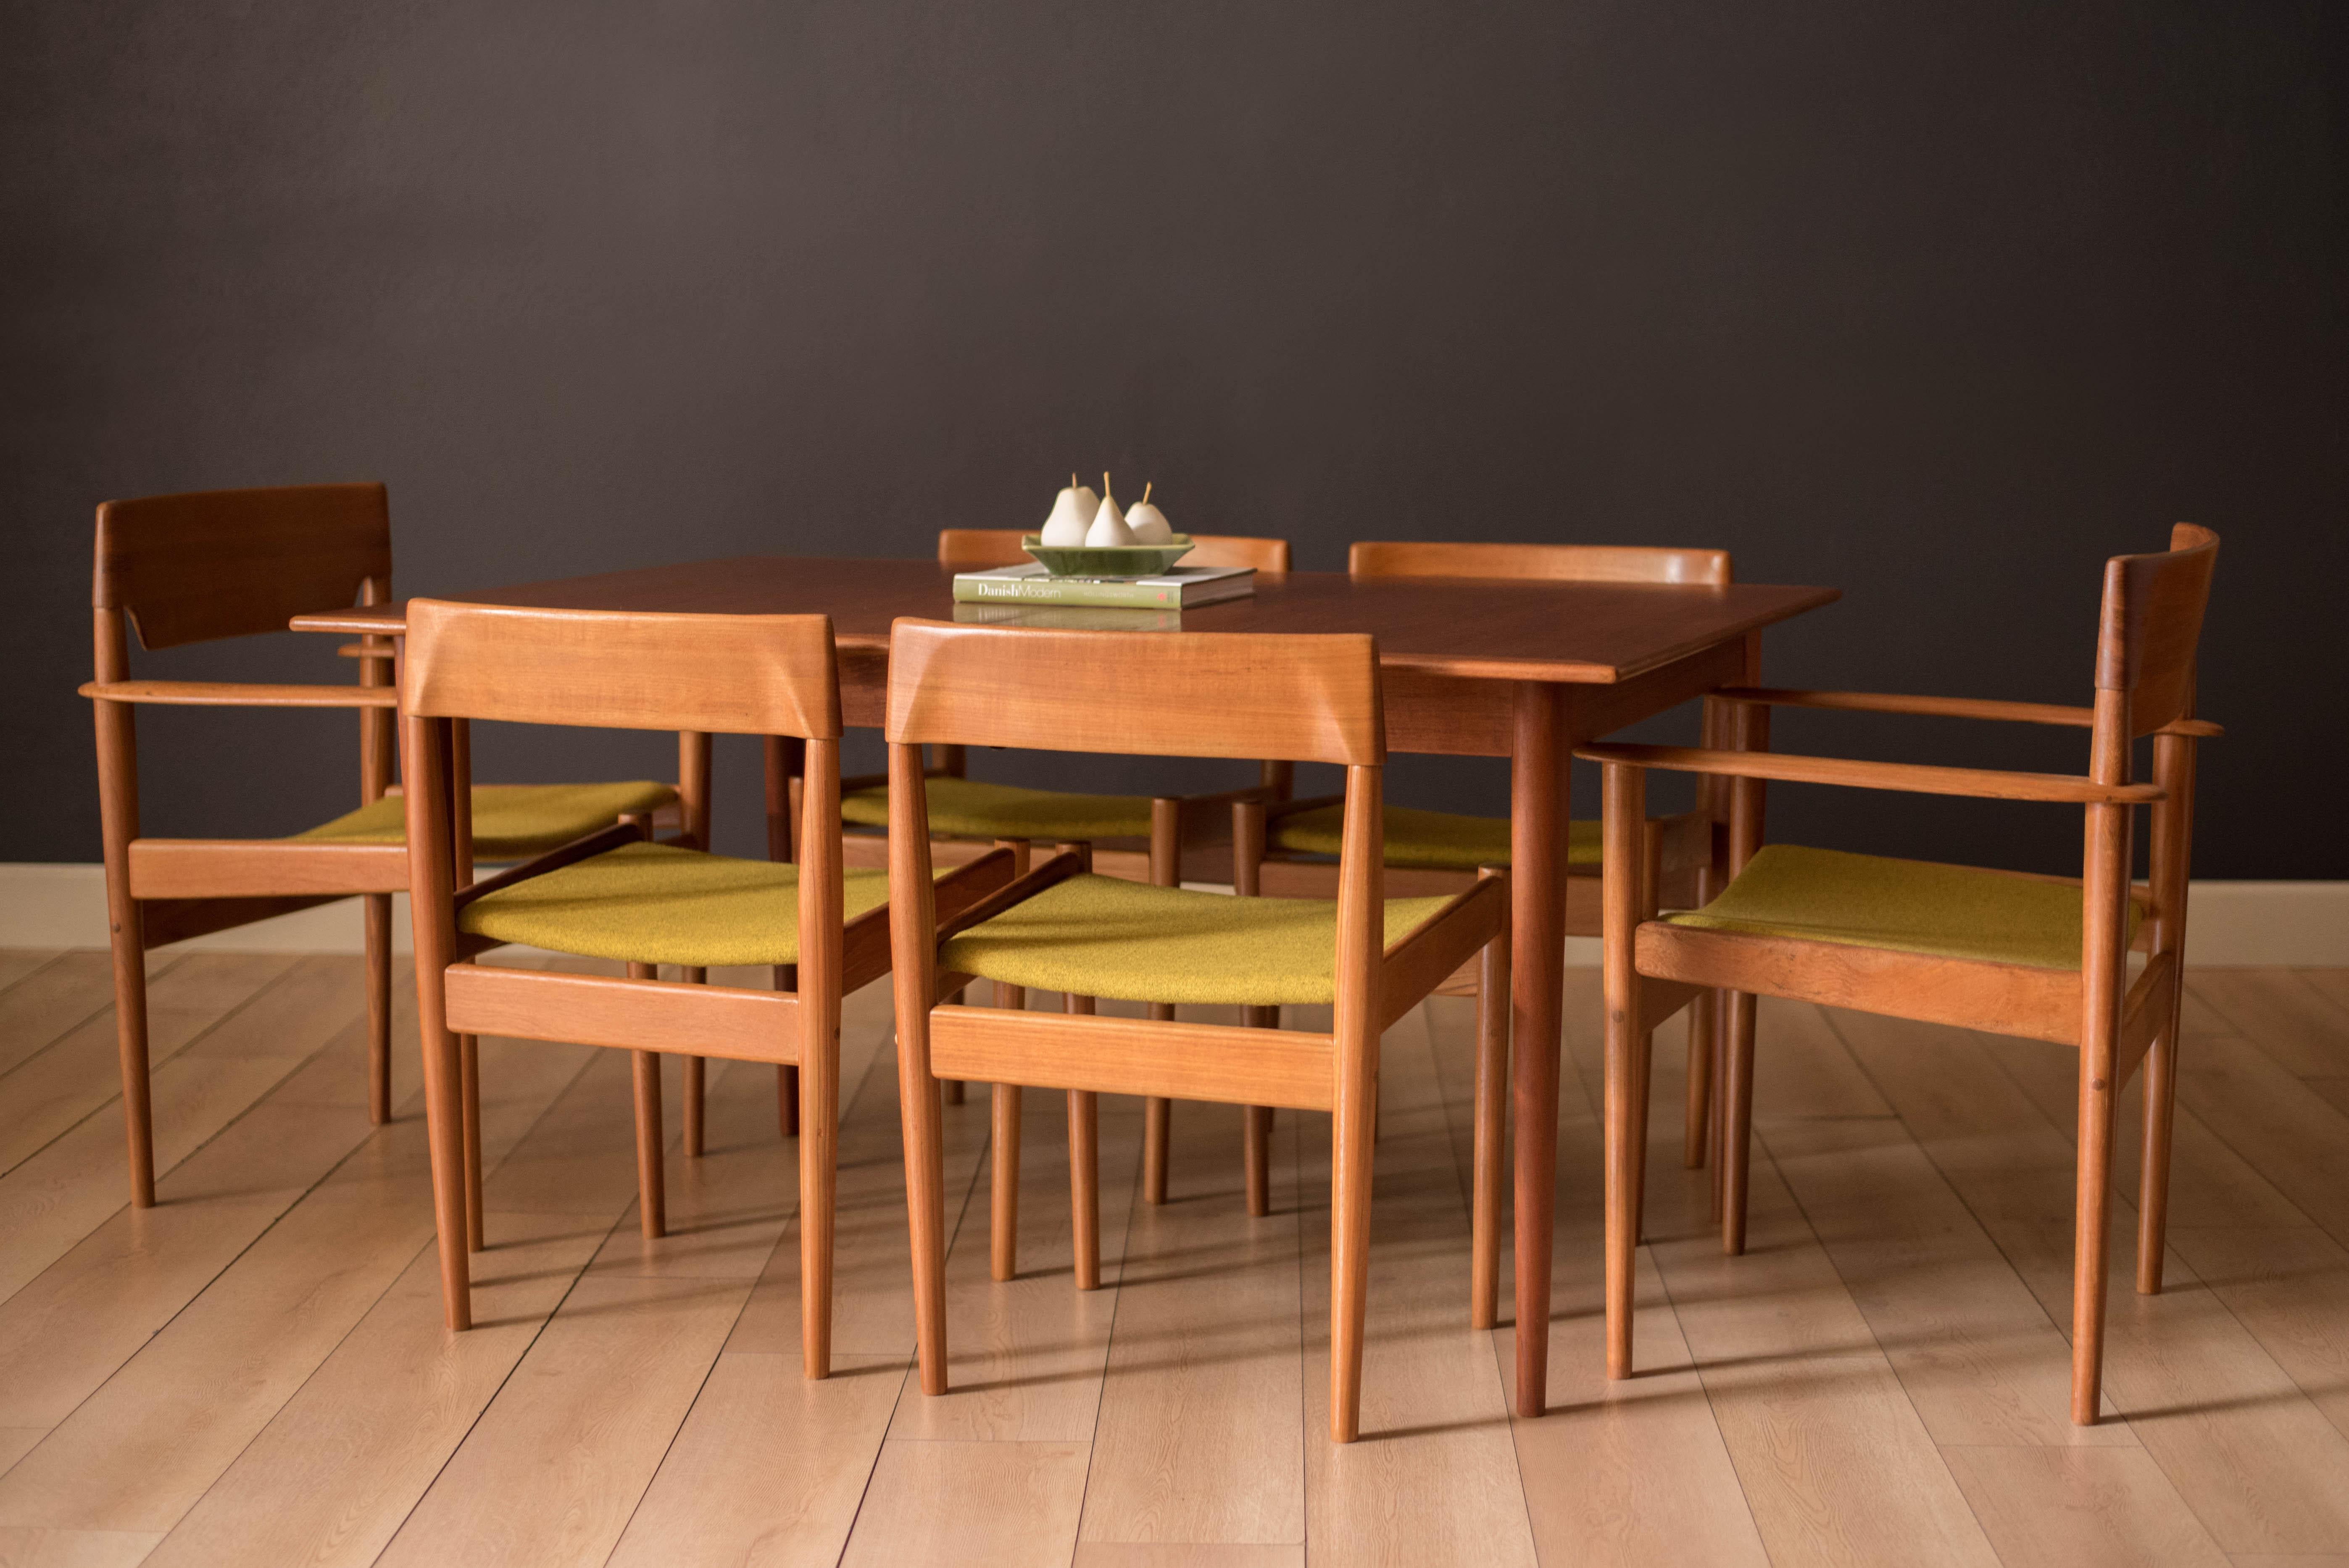 Mid-Century Modern extension dining table designed by Grete Jalk for Poul Jeppesen, Denmark circa 1960's. This piece is constructed with true craftsmanship featuring opposing vertical teak grains and picture frame edge banding within each table